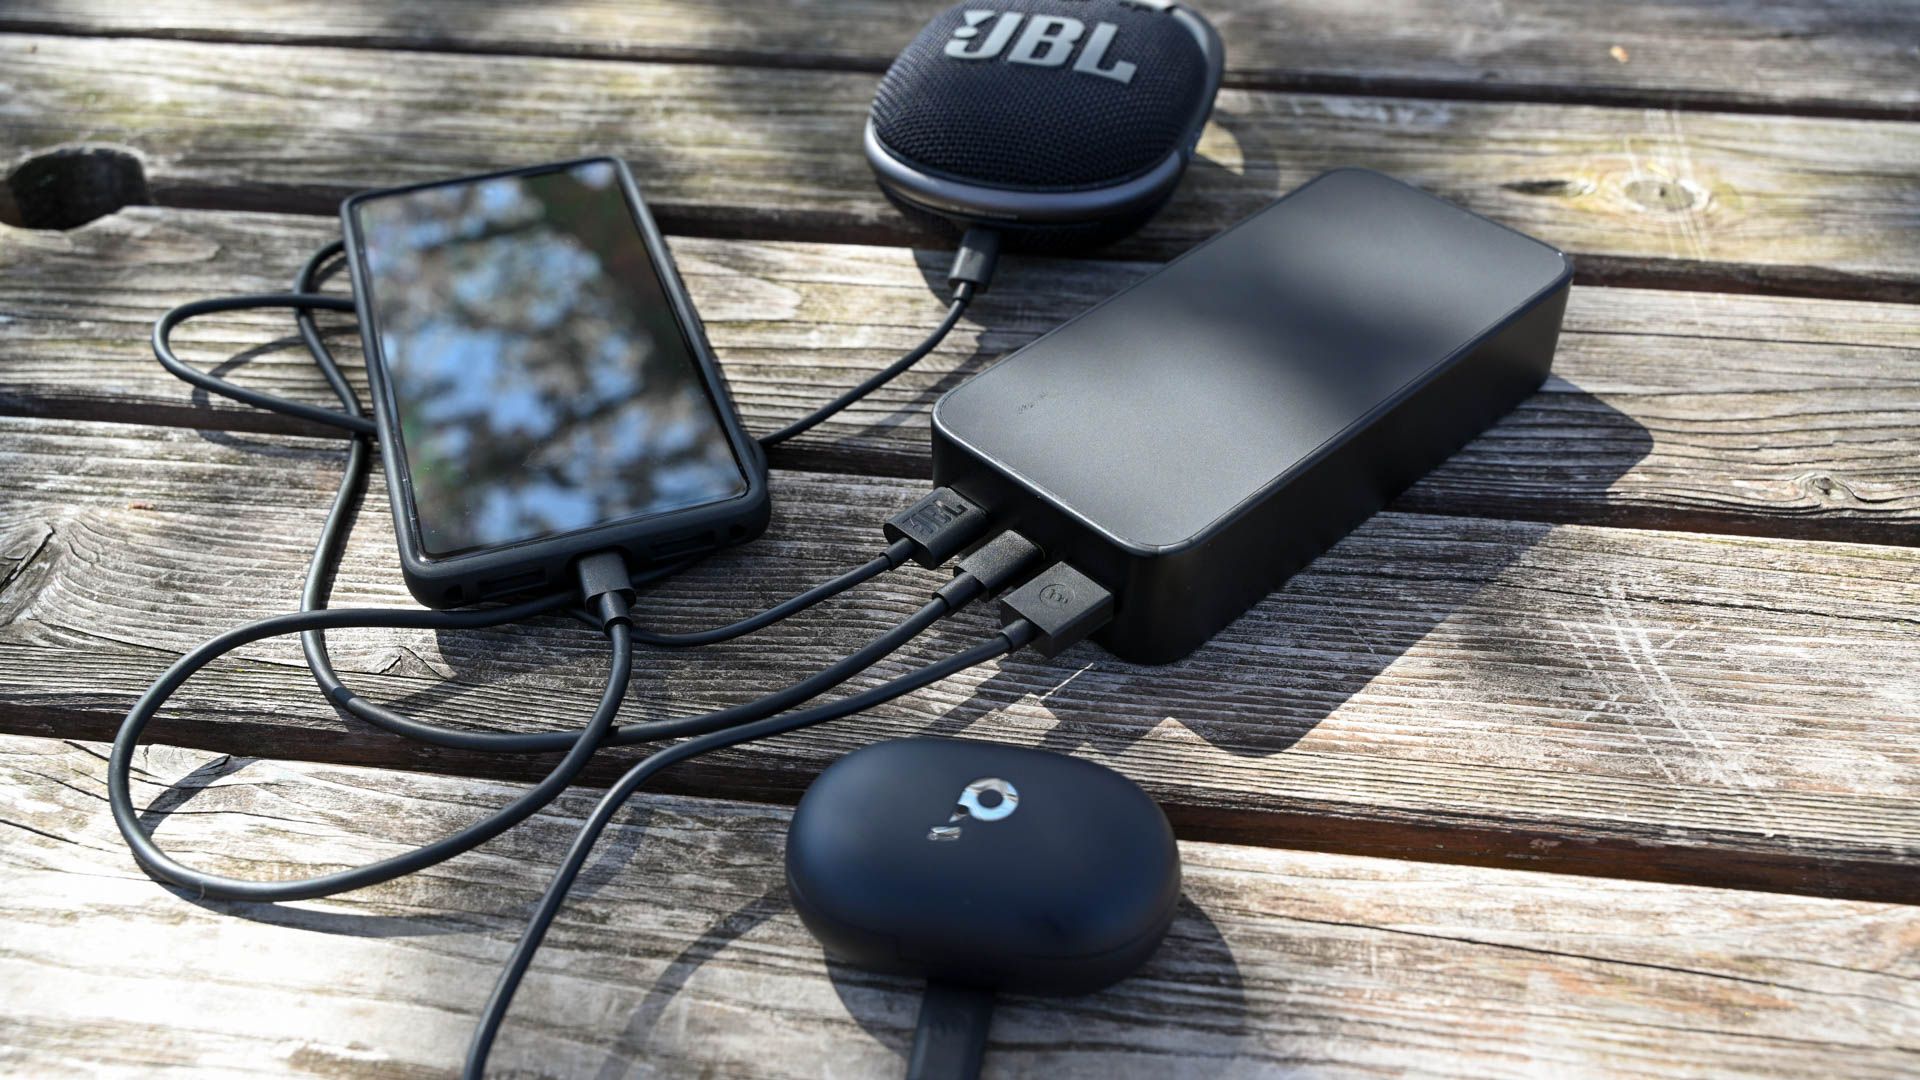 Charging three devices at once on a picnic table using the Mophie Powerstation XL.